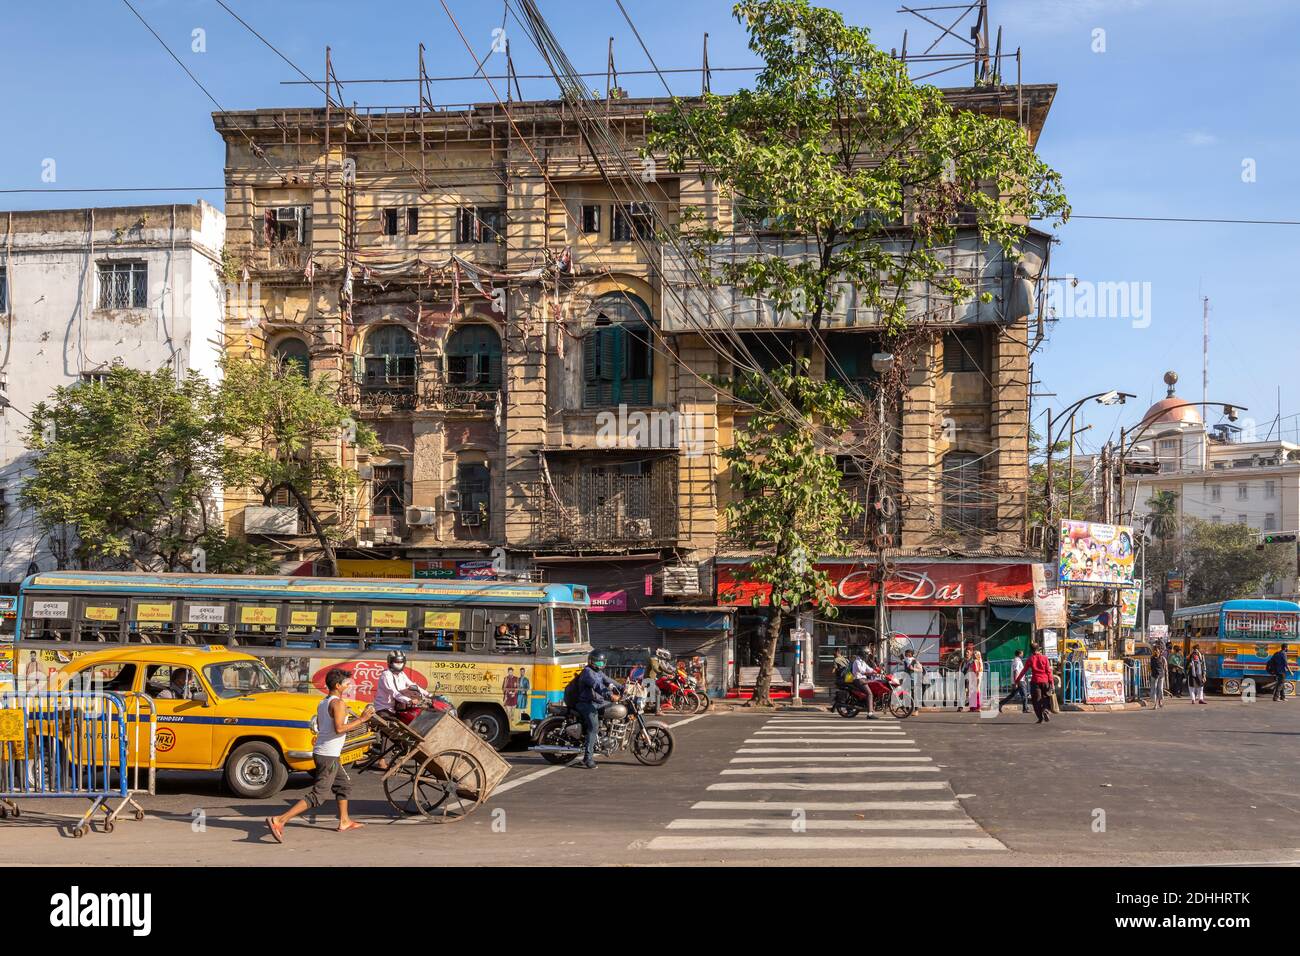 Public transport vehicles on Indian city road with old heritage buildings at Esplanade Kolkata Stock Photo